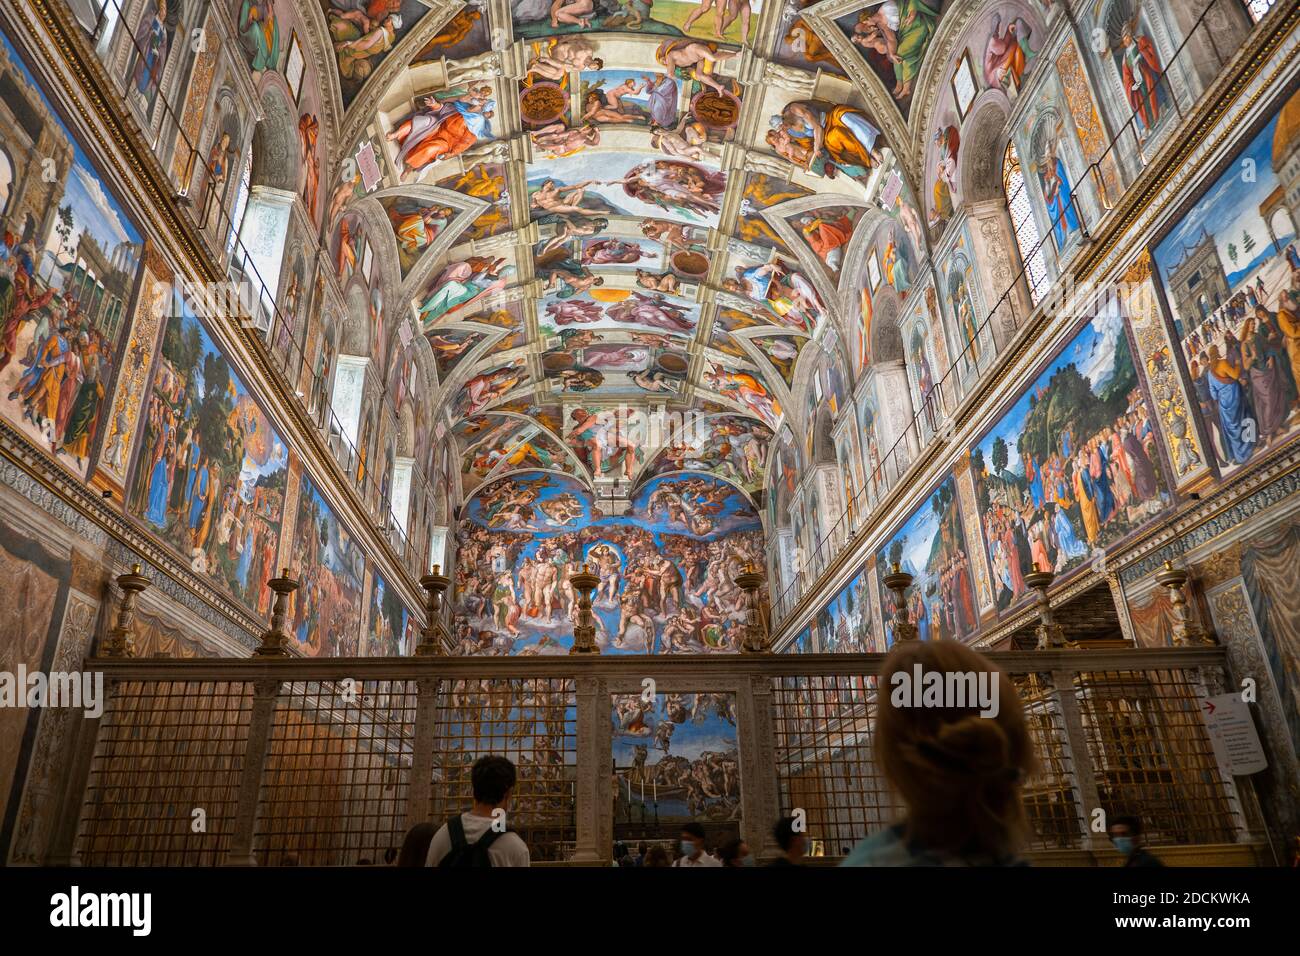 Sistine Chapel (Cappella Sistina) interior with frescoes by Michelangelo including The Last Judgment, Apostolic Palace, Vatican Museums, Rome, Italy Stock Photo